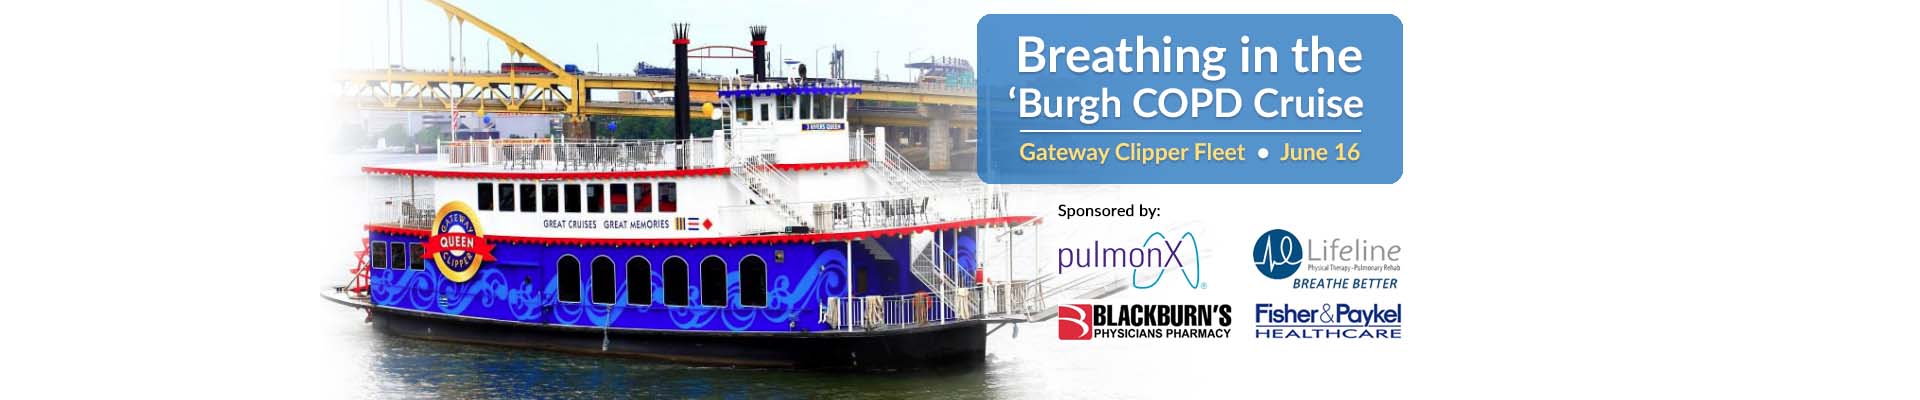 Breathing In The 'Burgh COPD Cruise